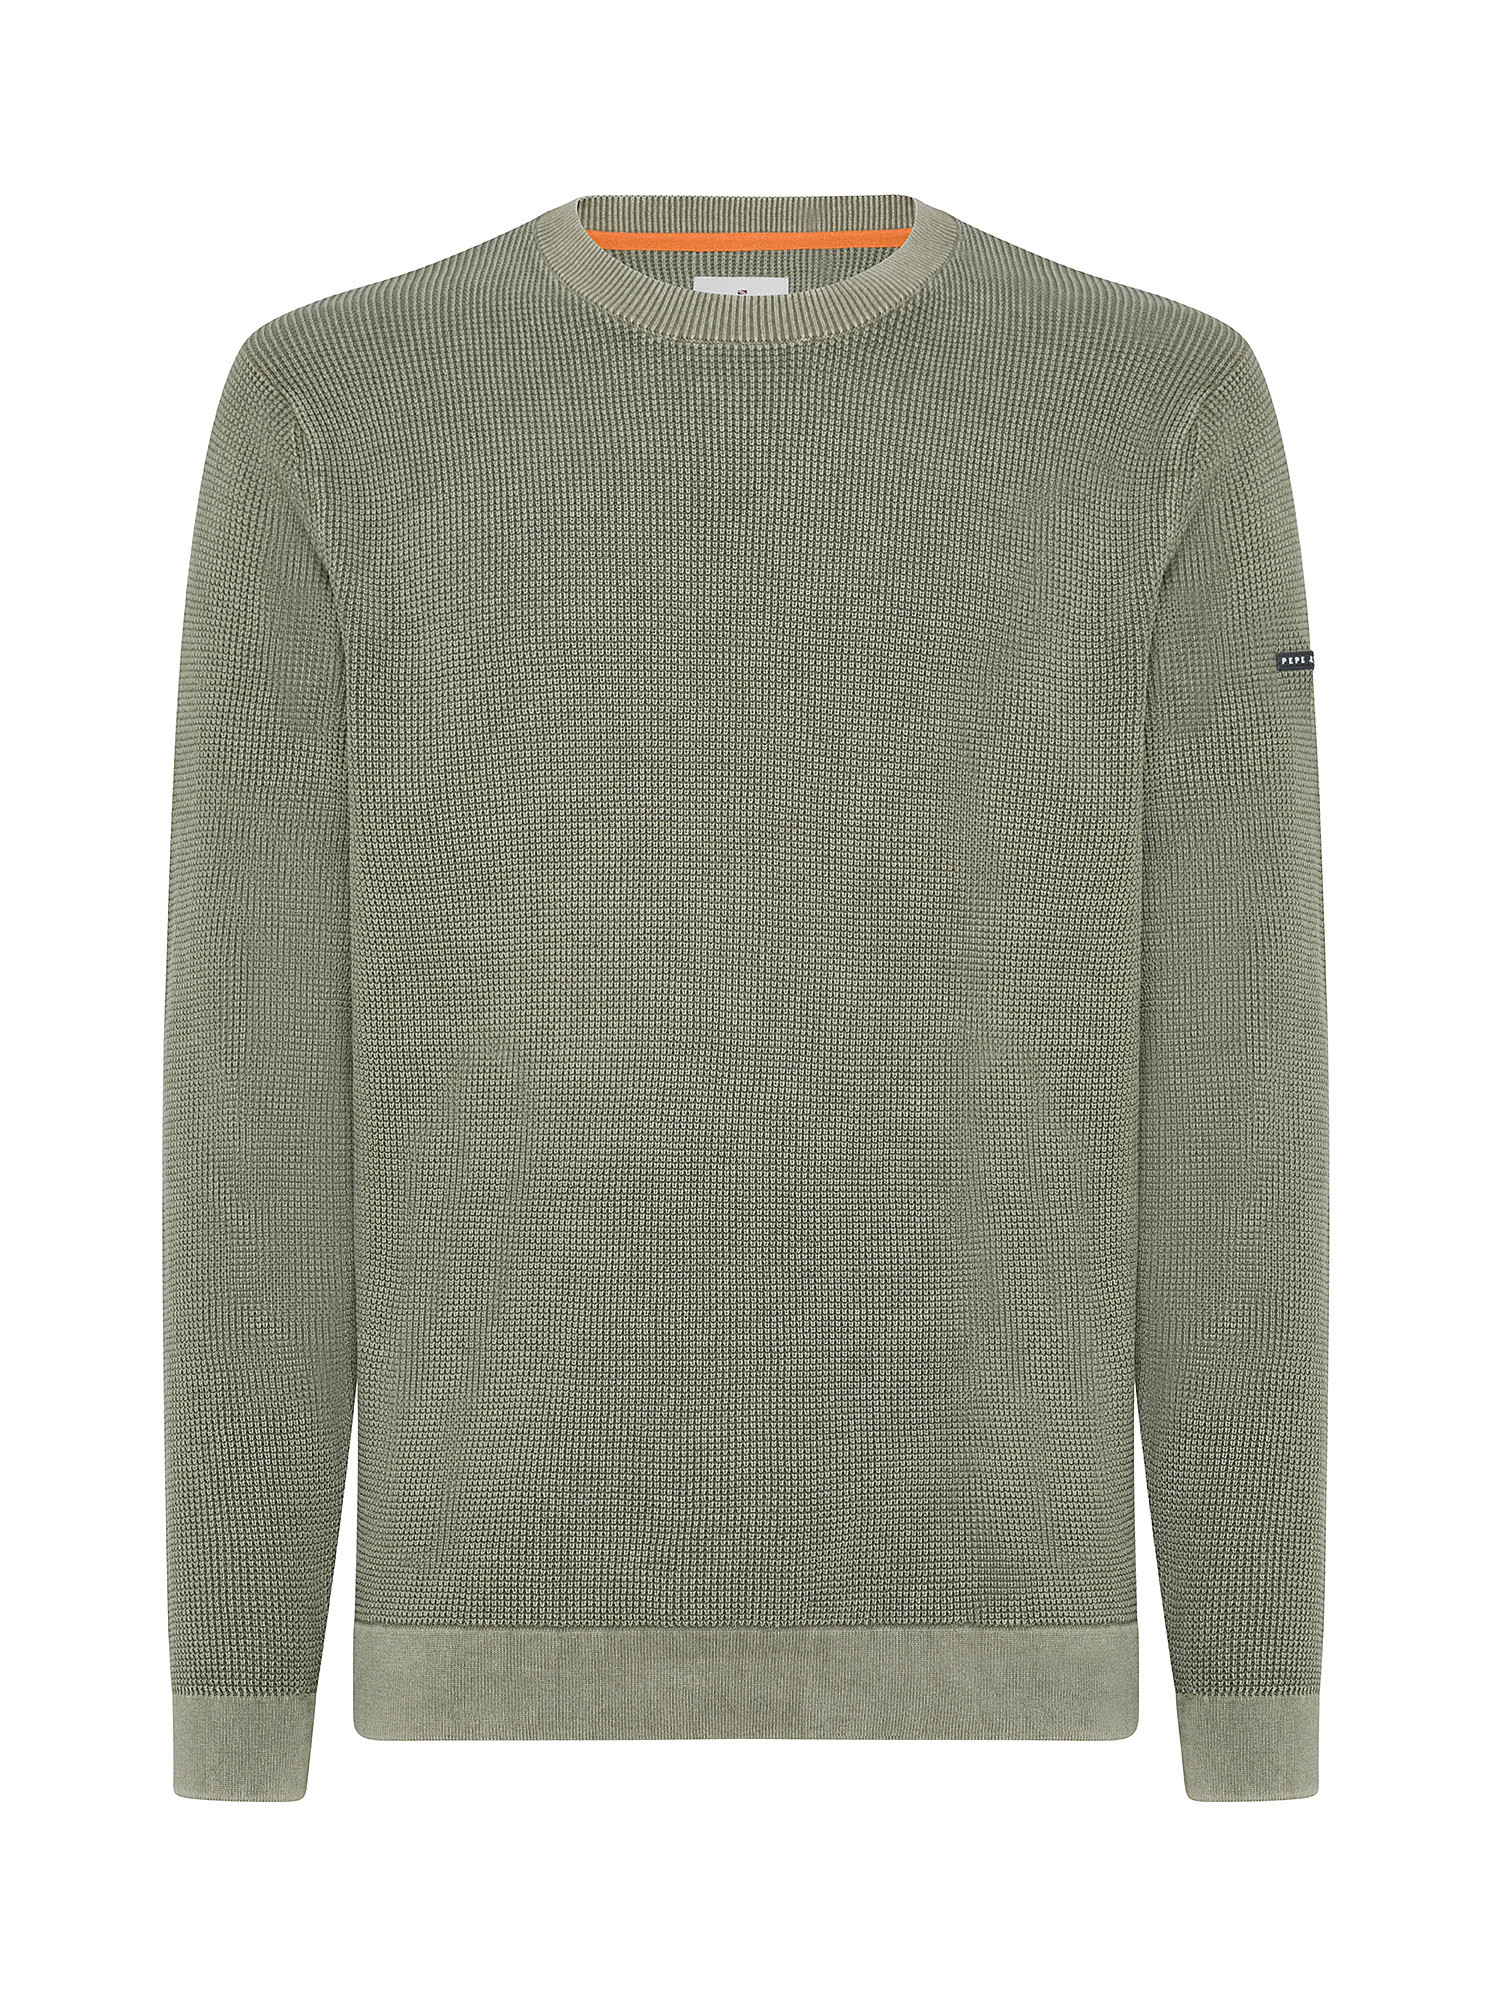 Pepe Jeans - Maglione a nido d'ape, Verde chiaro, large image number 0